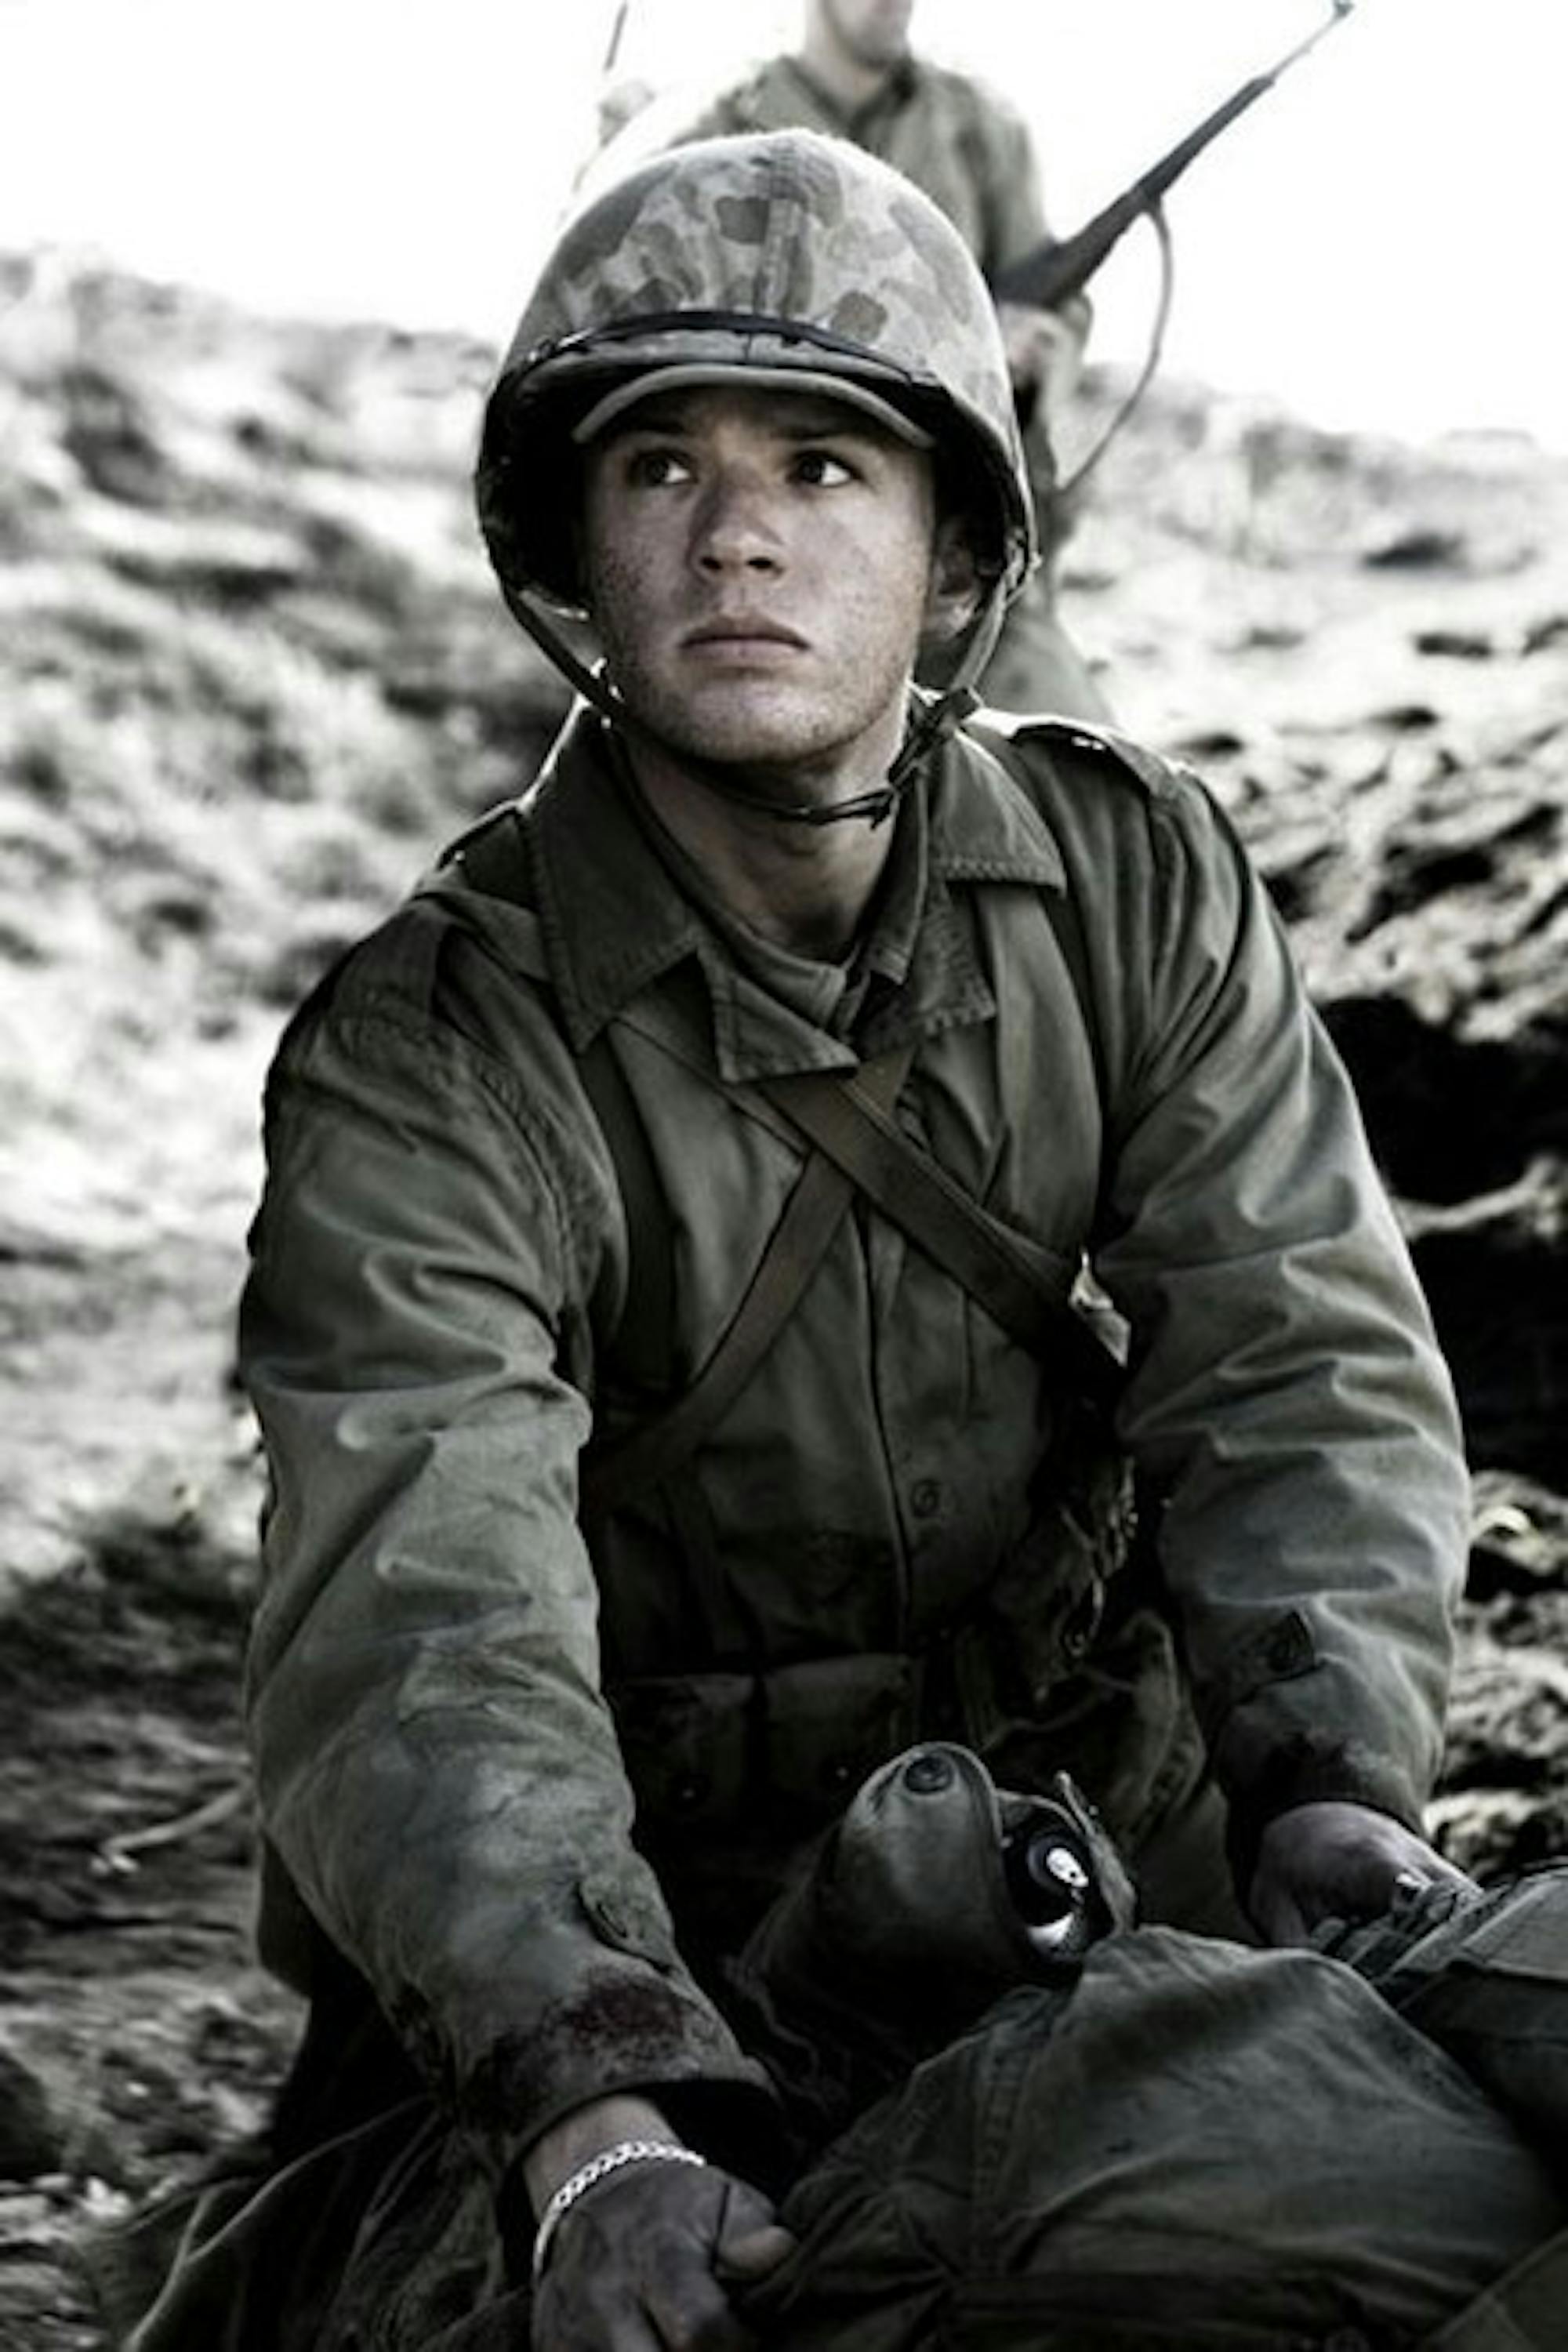 Ryan Phillipe stars as one of three surviving soldiers who raised the flag at Iwo Jima in Clint Eastwood's latest film, 